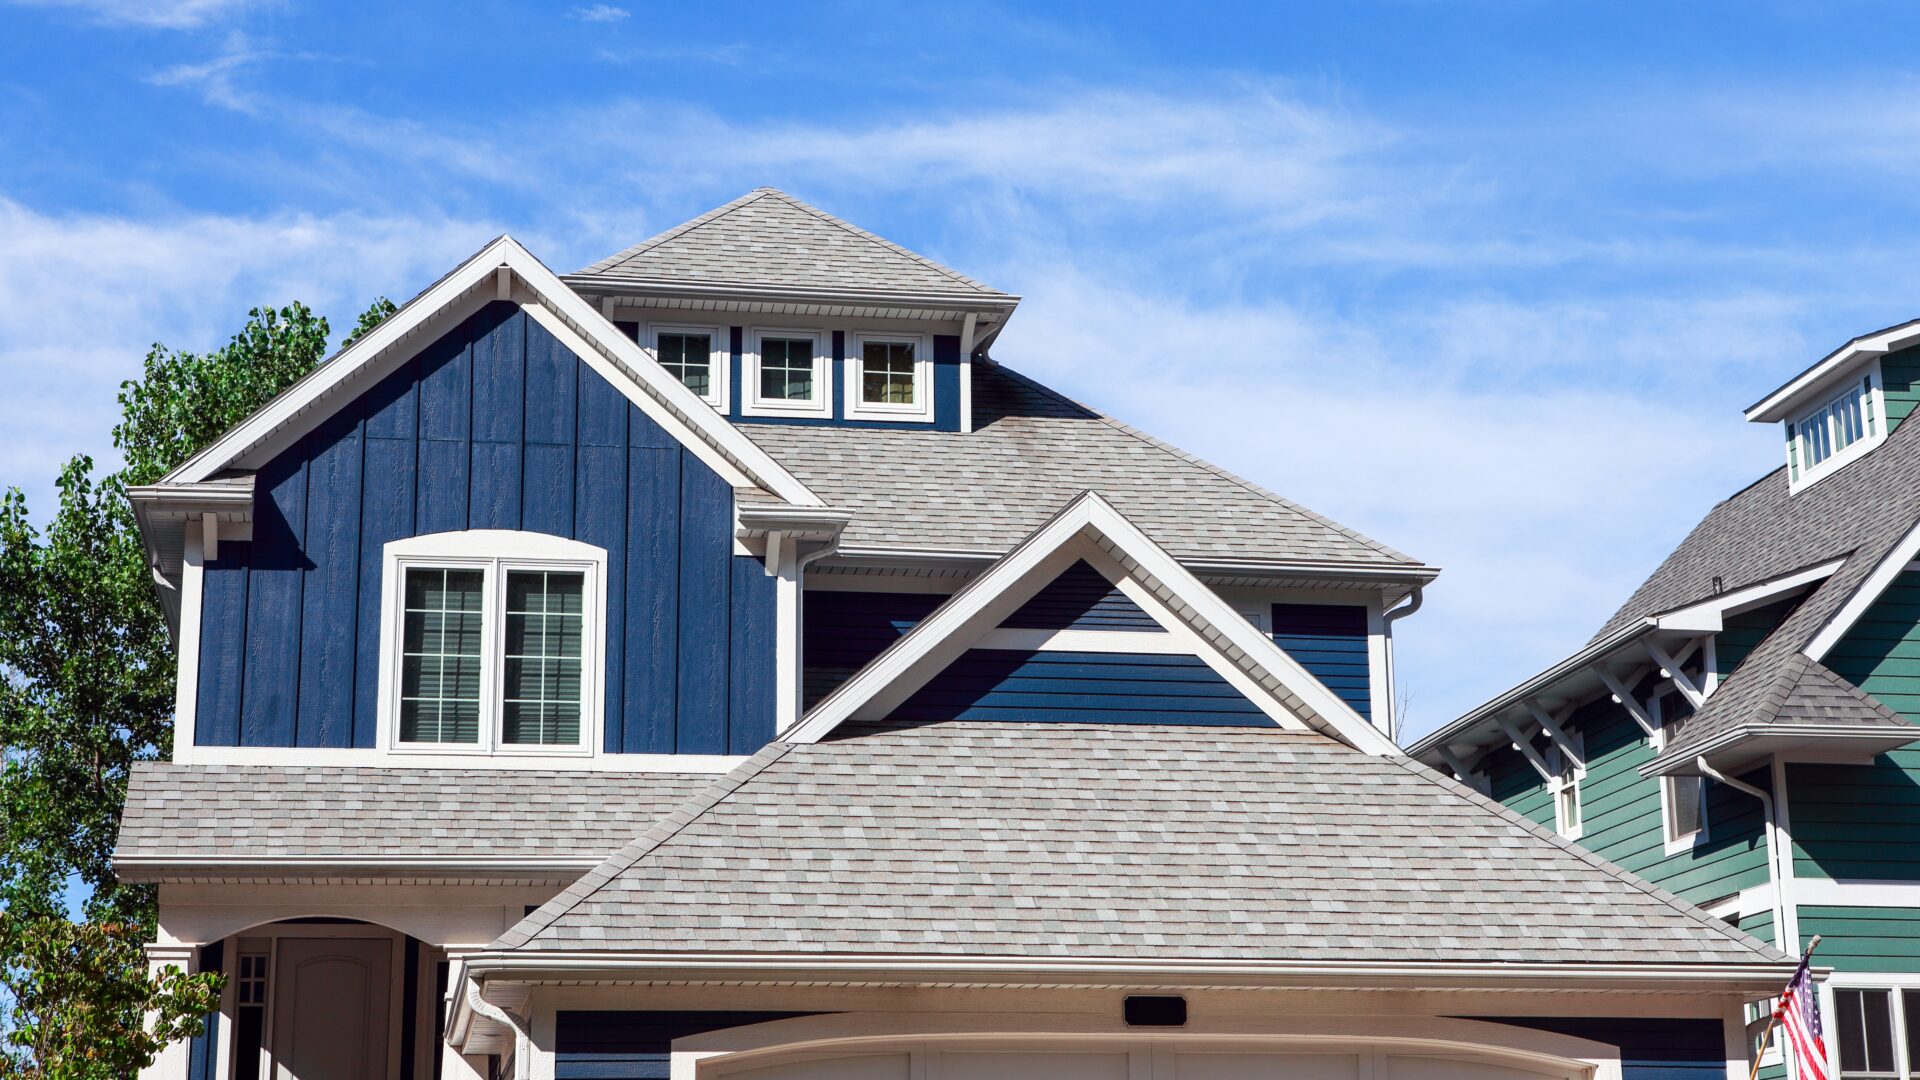 A blue-sided home with gray shingle roofing